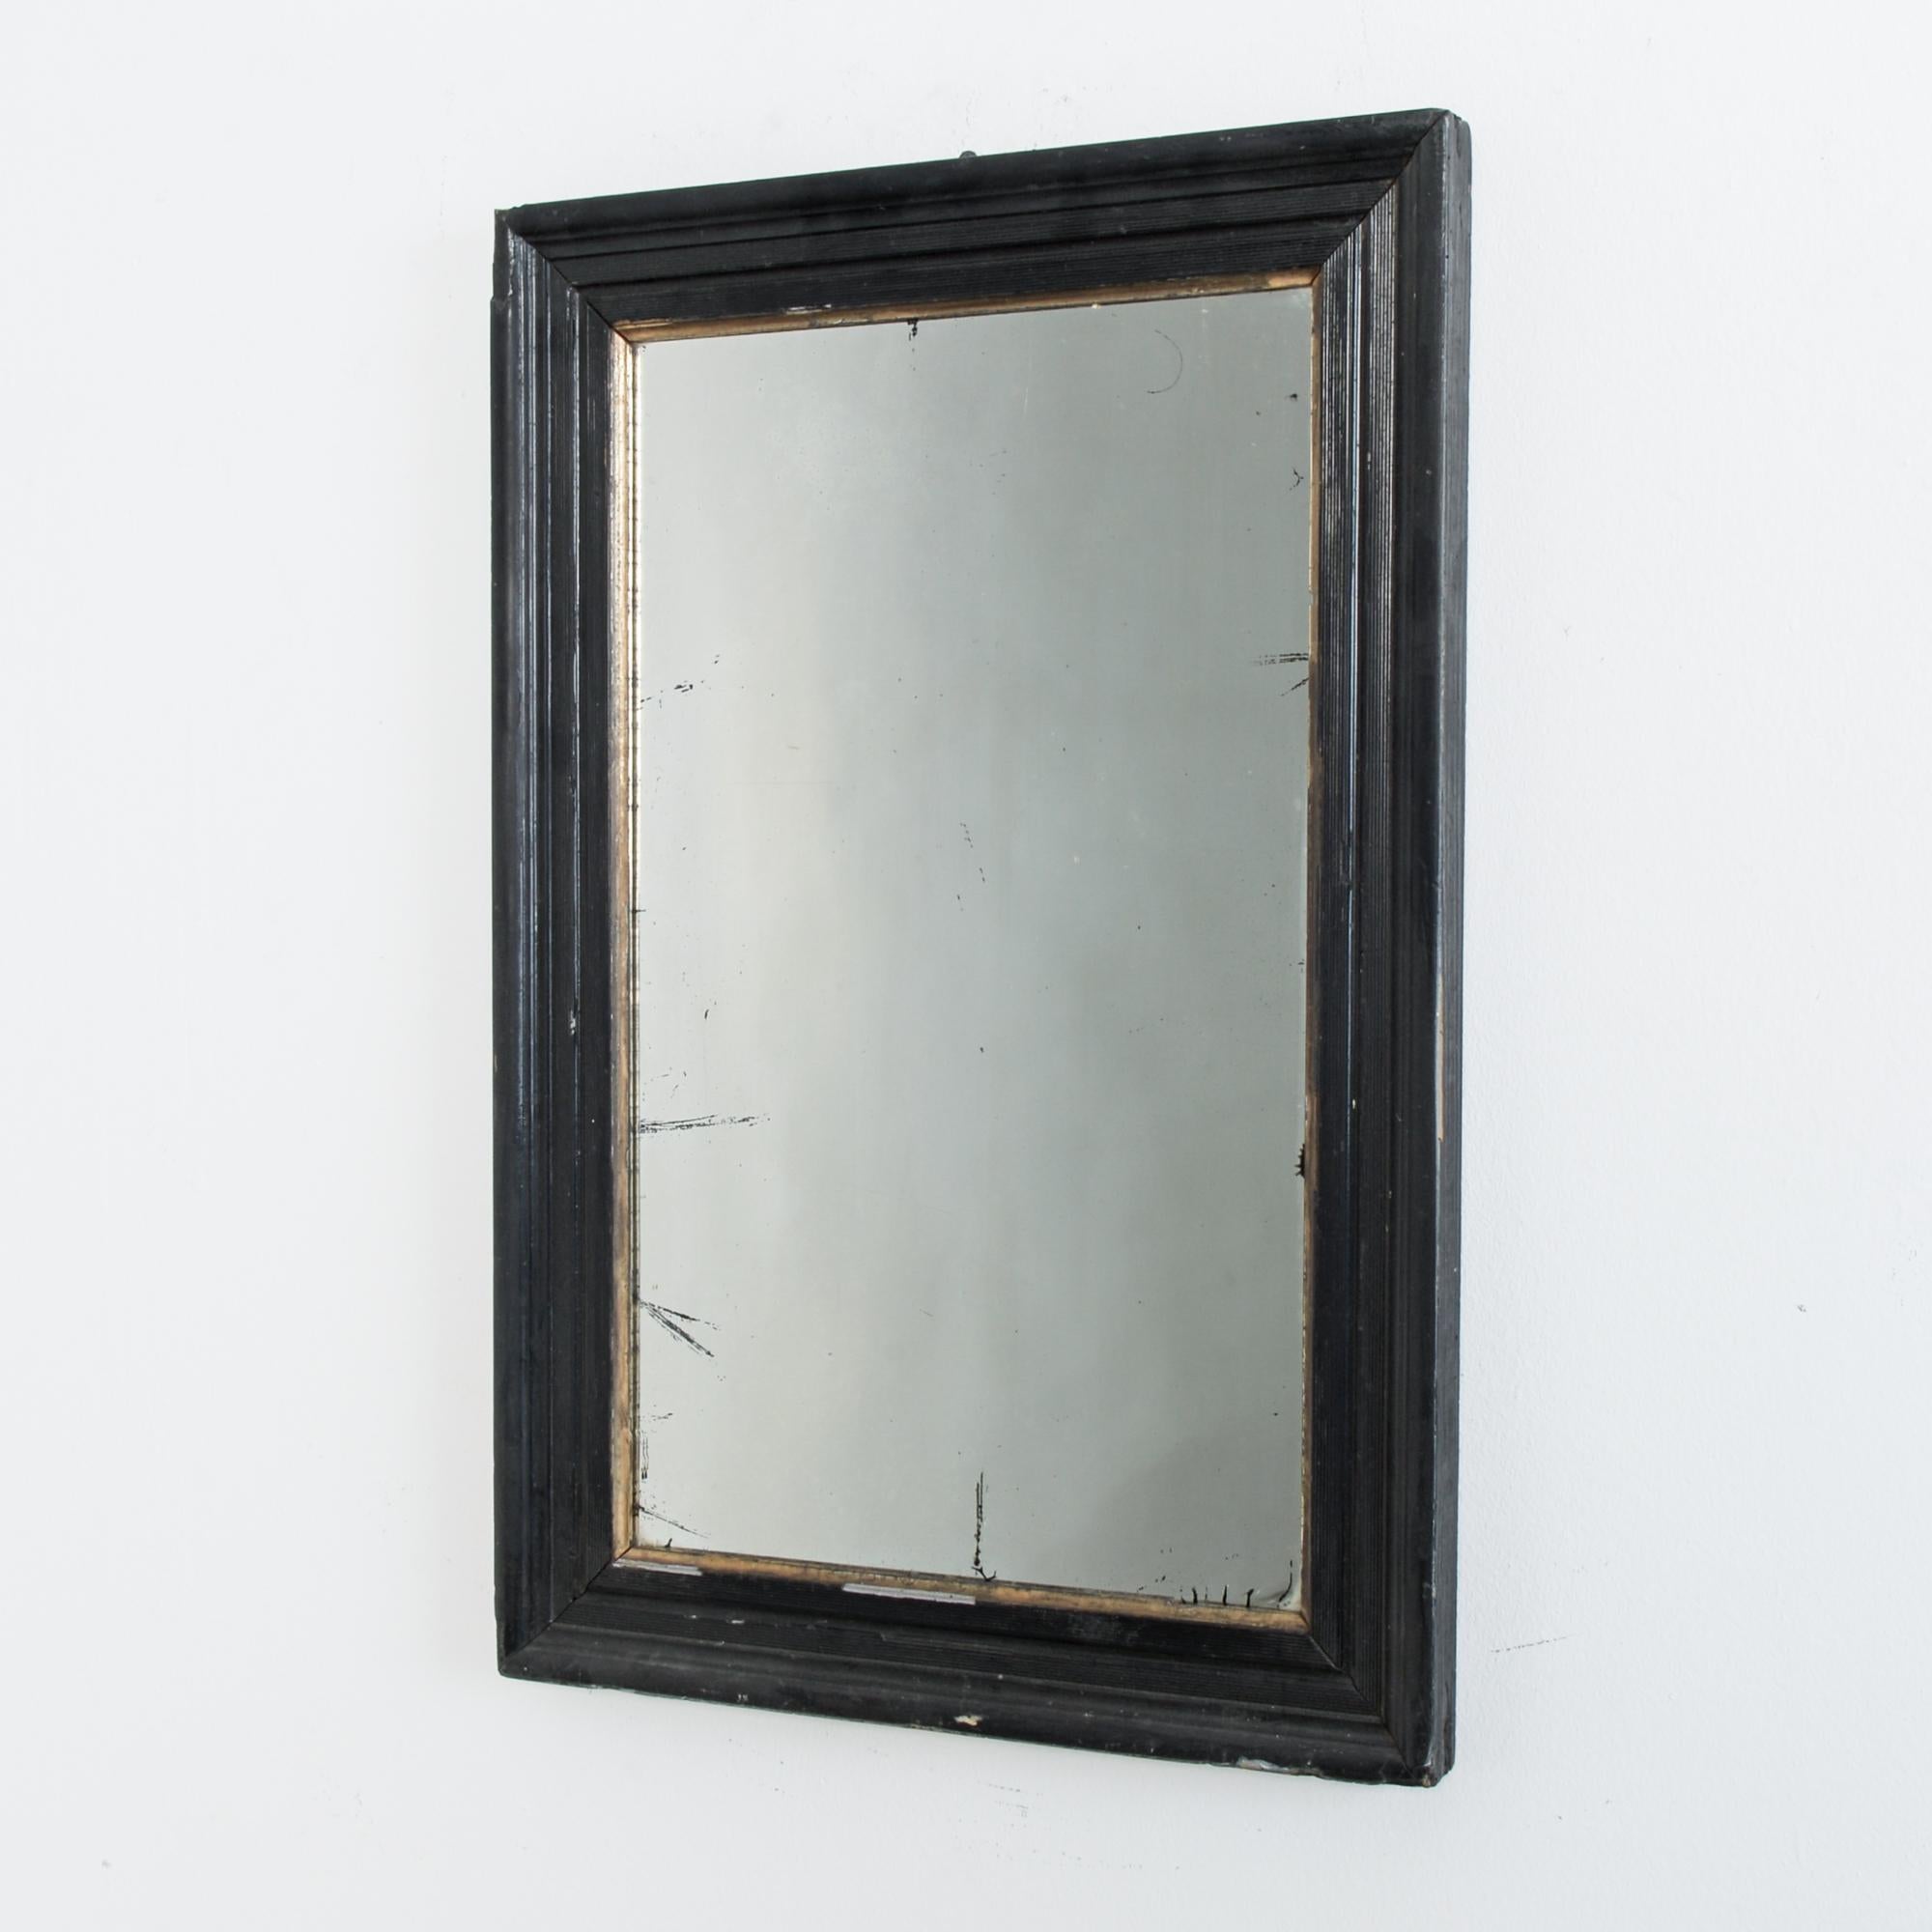 From France, circa 1900. This simple black lacquered mirror in a simplified Napoleon III style. A great rustic patina, features gilded inset moulding and original mercury glass mirror with characteristic patina.
   